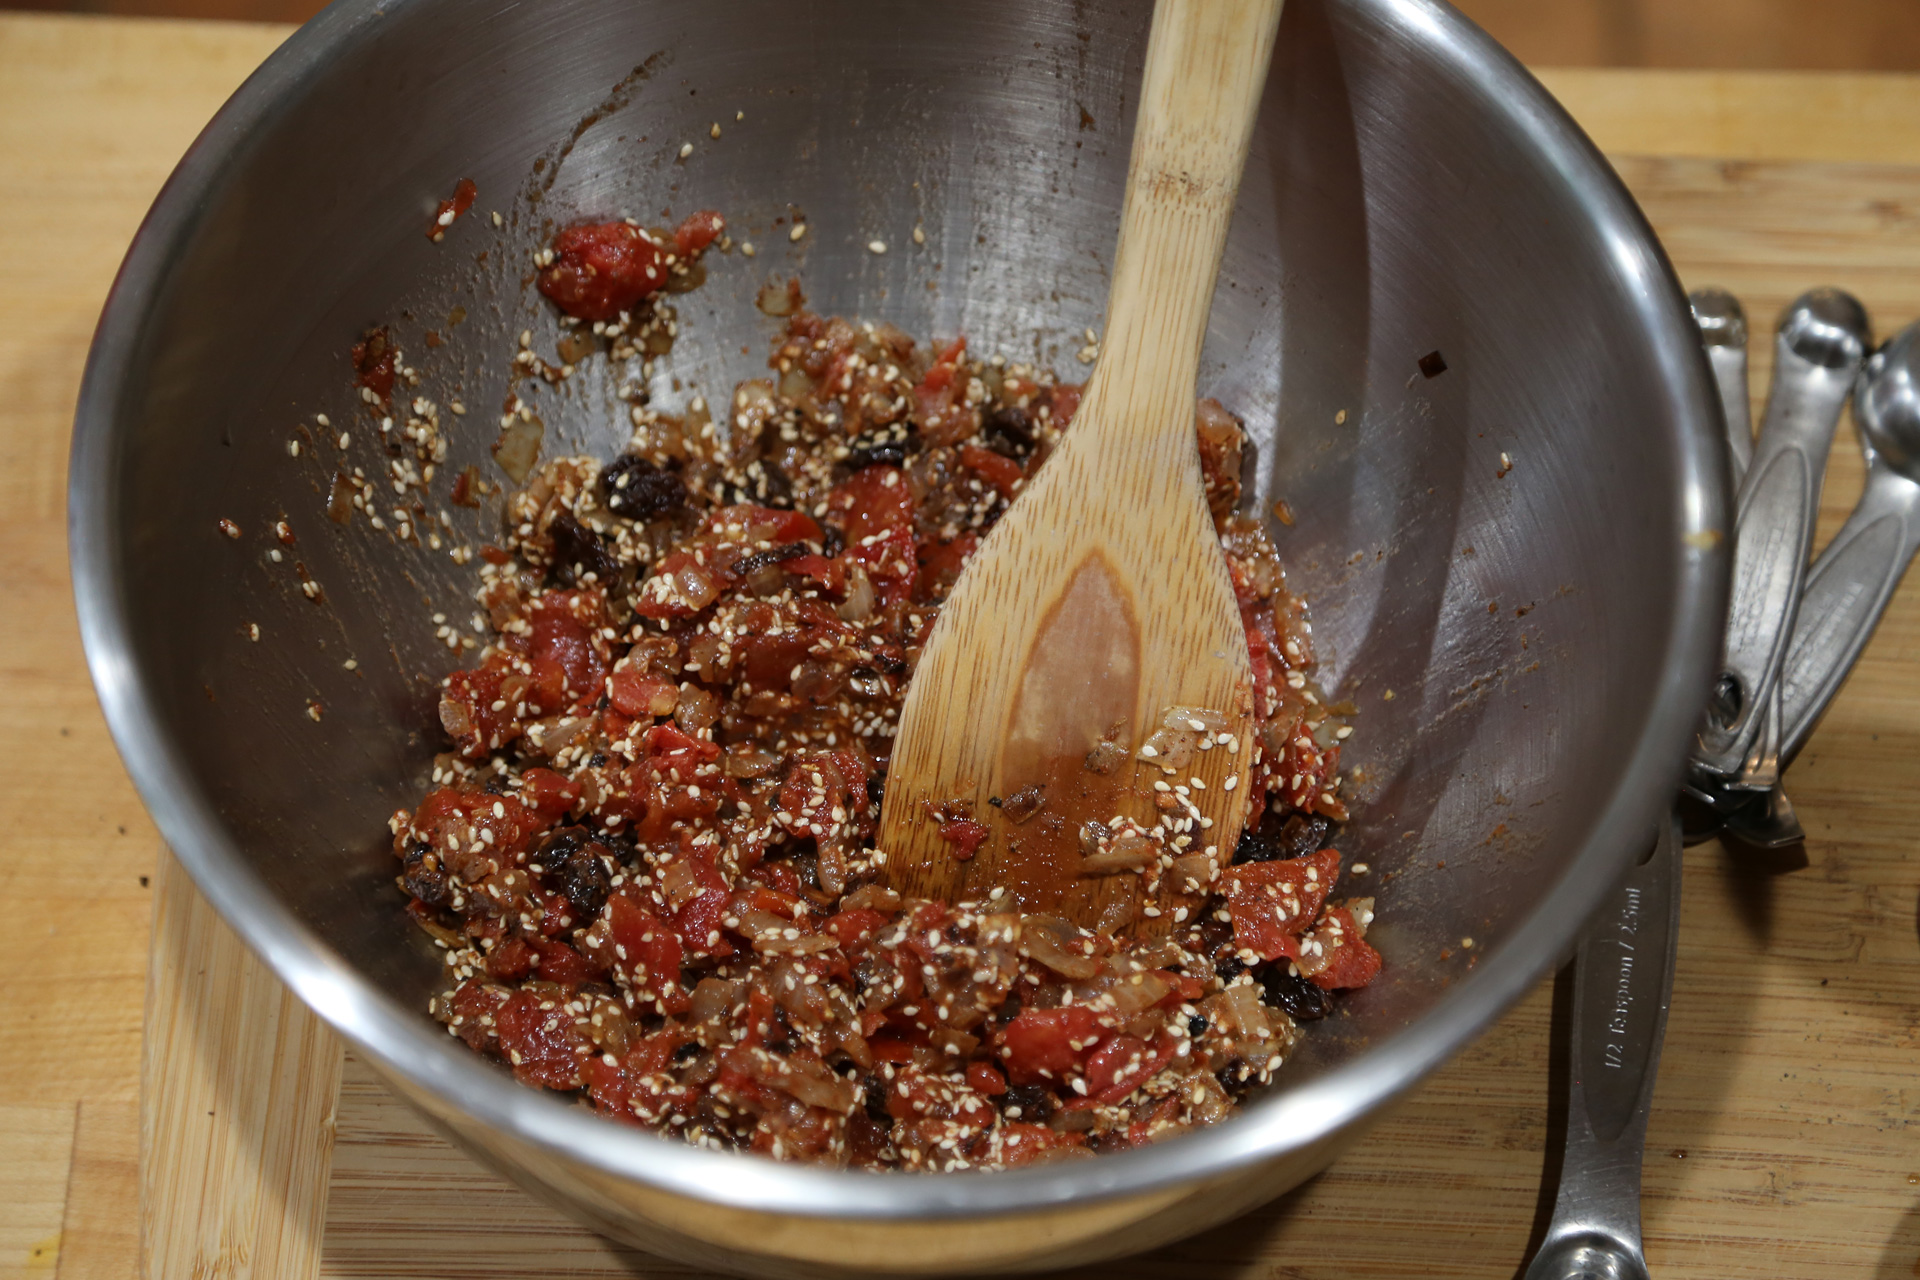 Add the diced tomatoes, cinnamon, anise, salt, black pepper, and cloves. Set aside